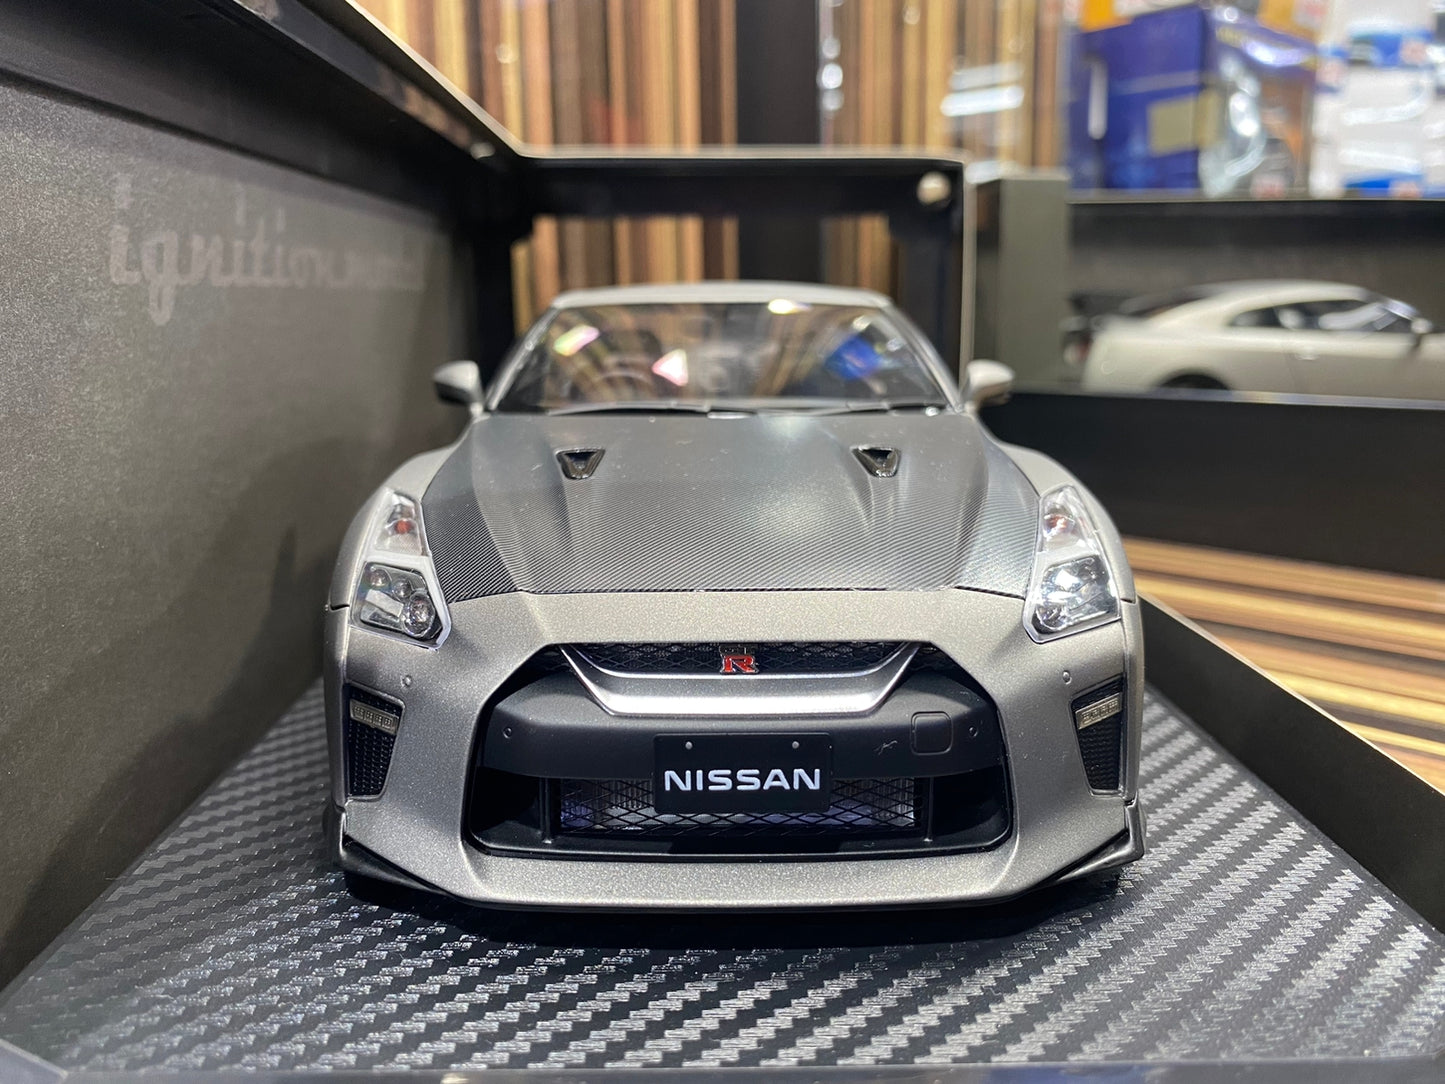 Nissan GT-R R35 1/18 Scale Diecast Model car by Ignition model